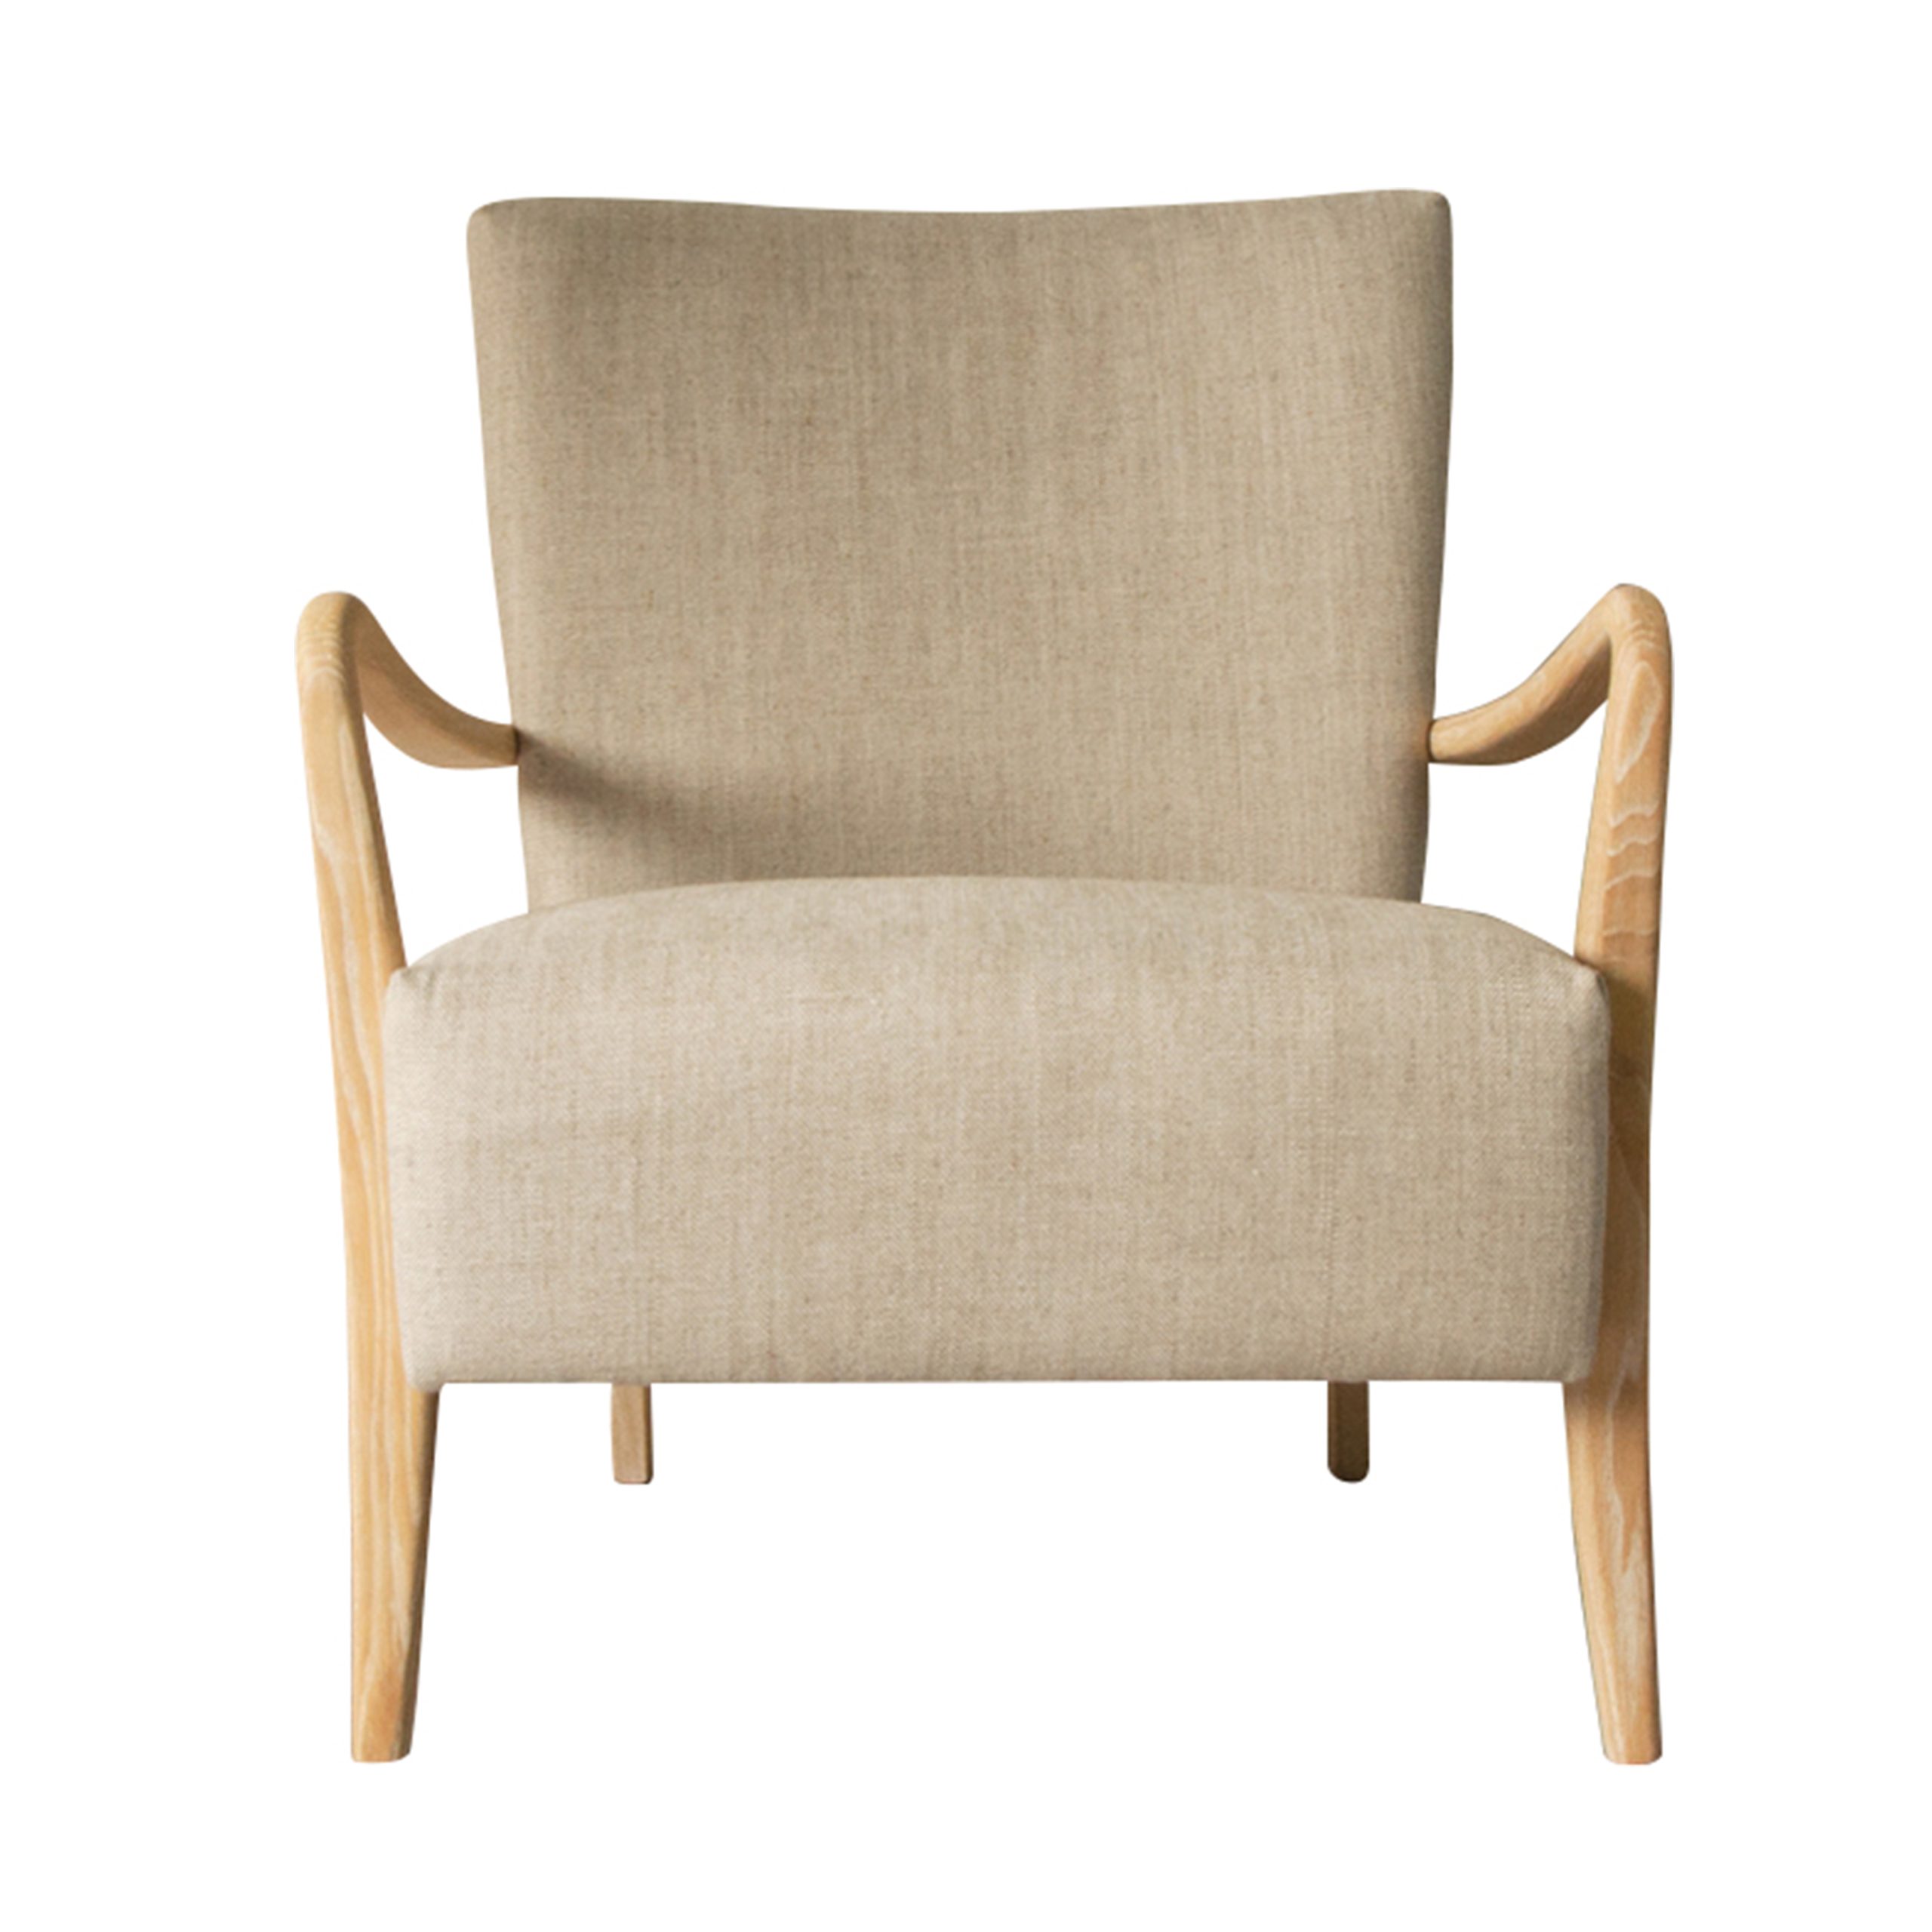 Gallery Direct Chedworth Armchair Natural Linen